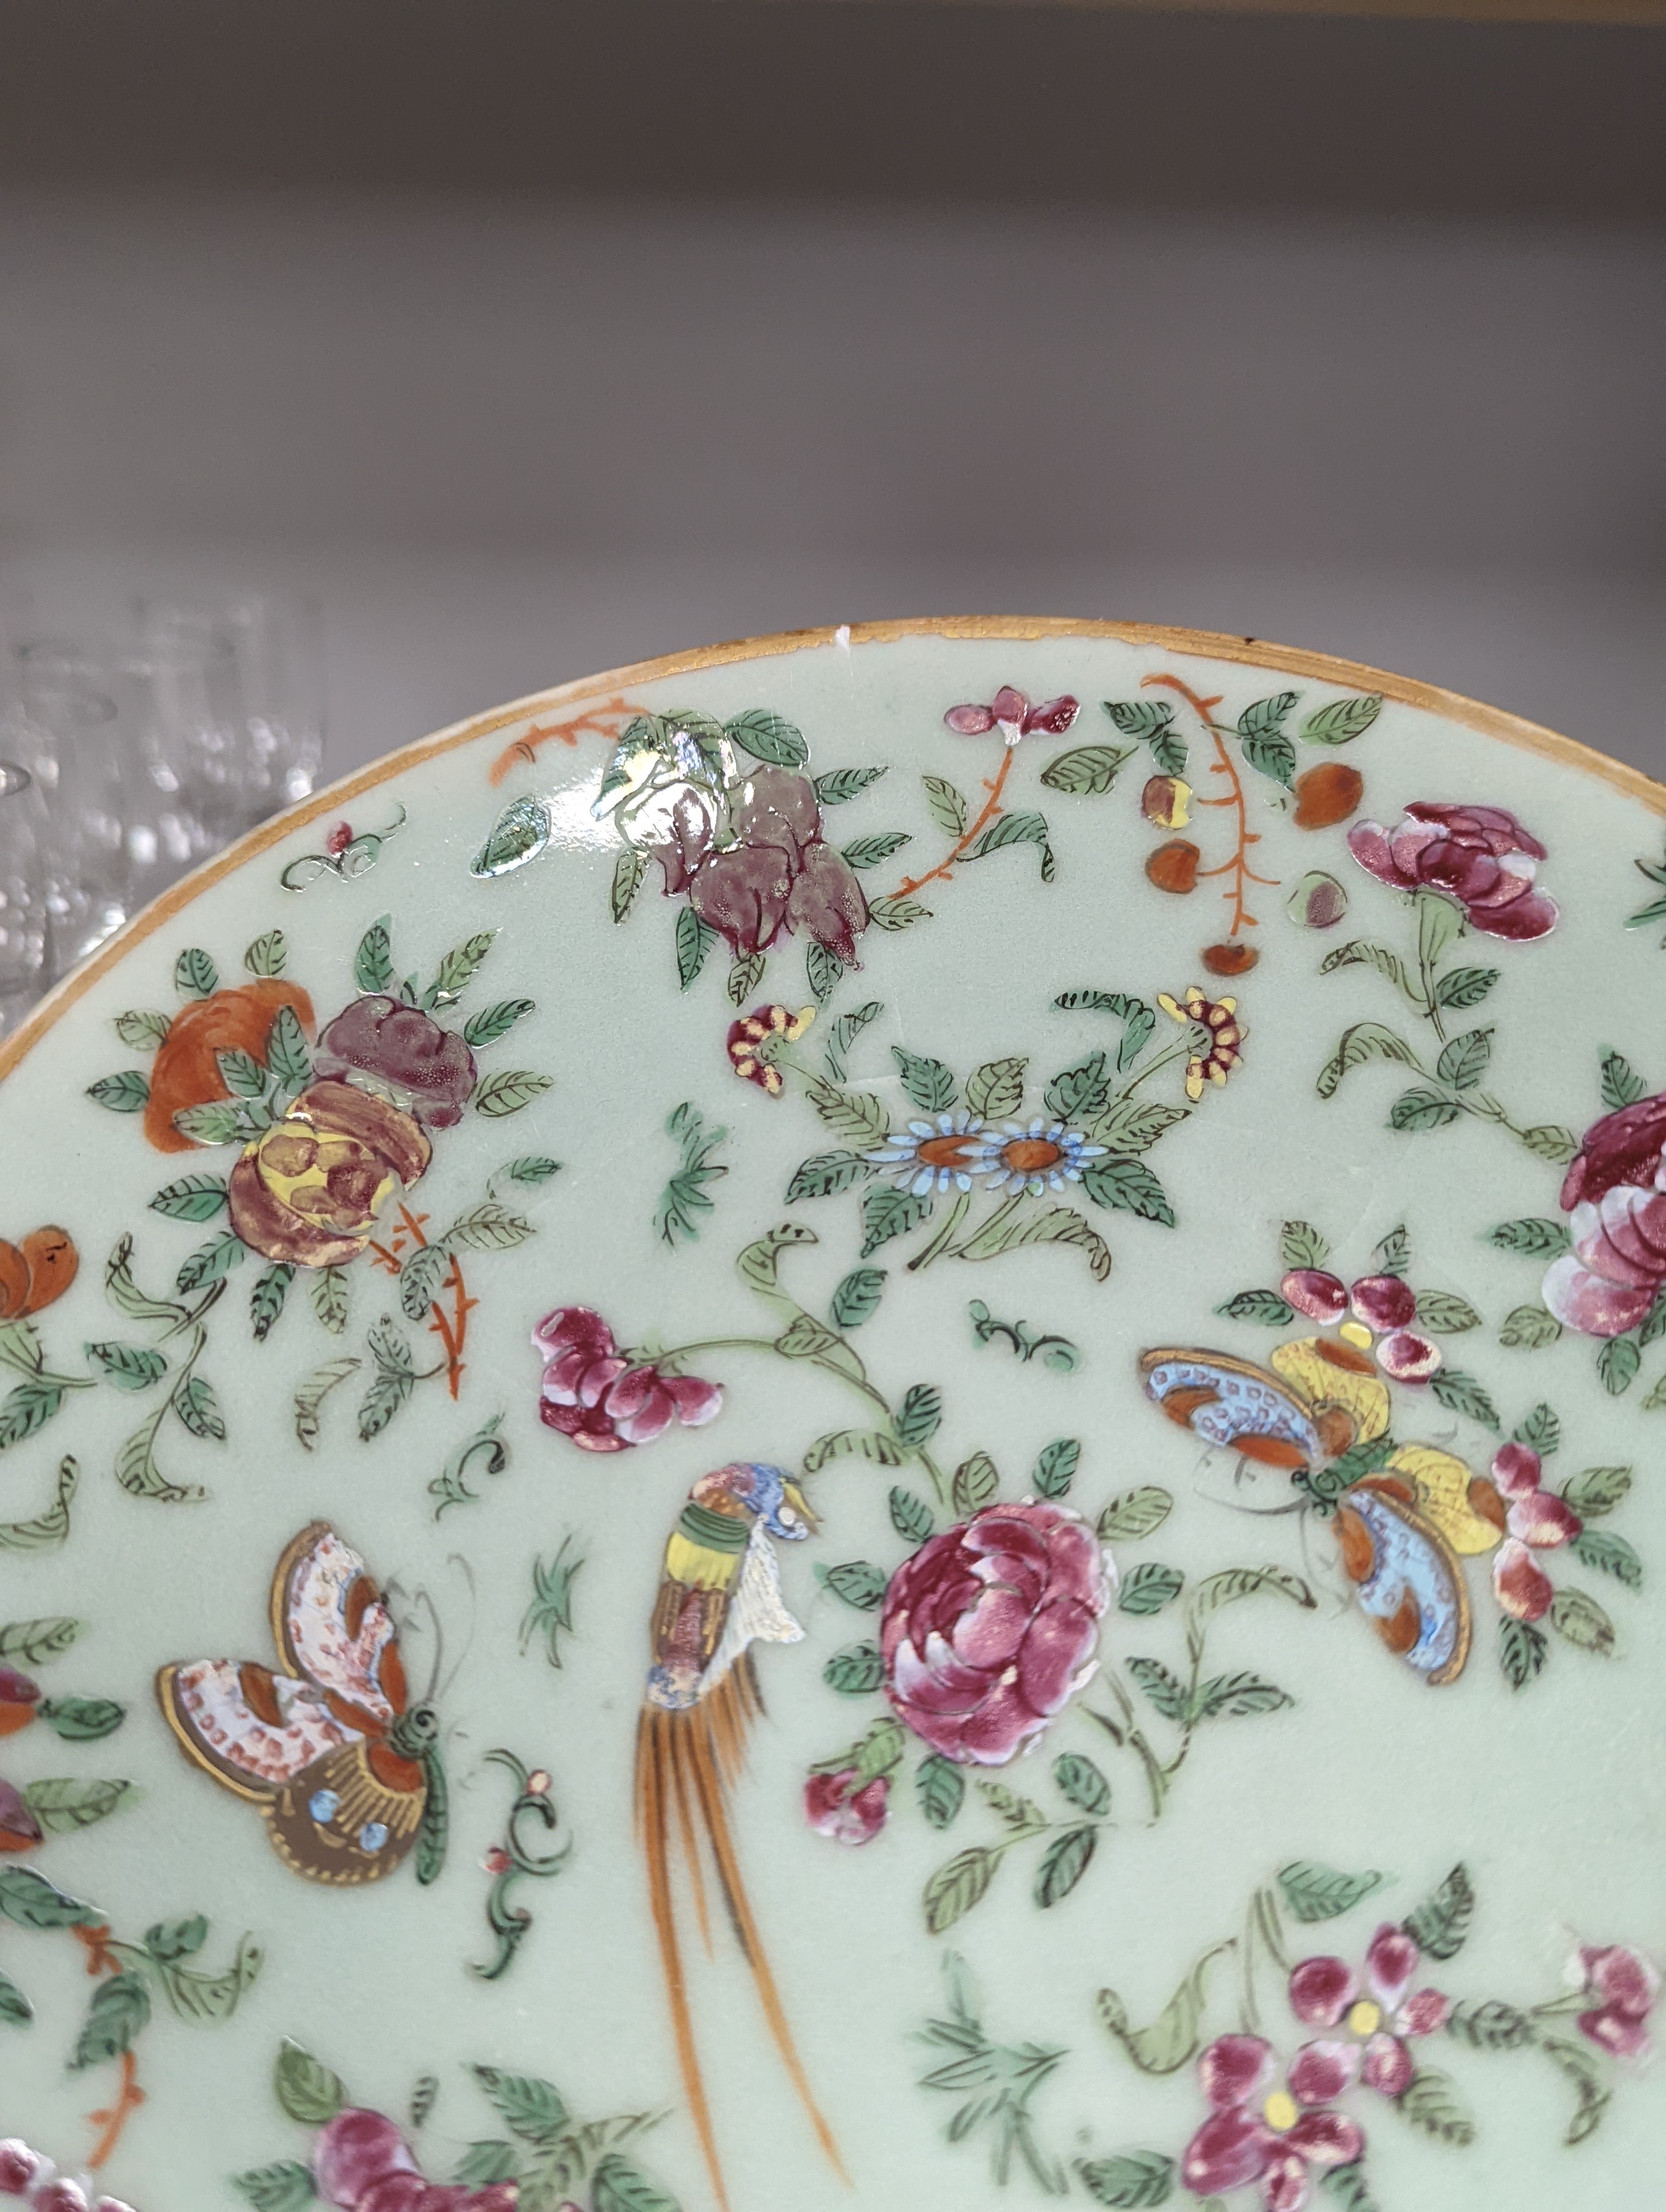 Eleven Chinese celadon ground famille rose plates, mid 19th century 22cm